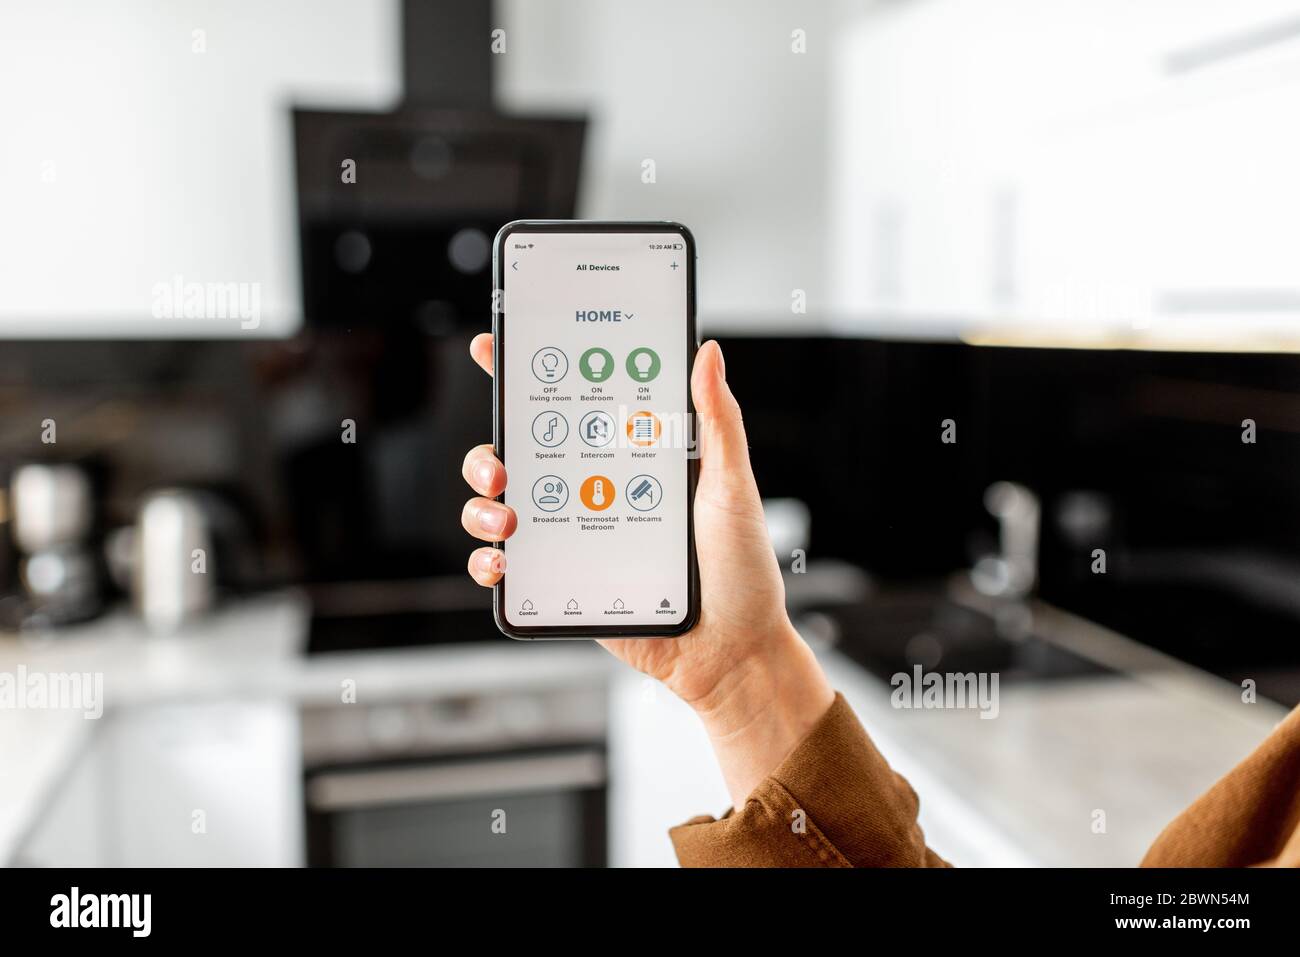 Woman controlling kitchen appliances with a smart phone, close-up on mobile device with launched smart home application. Smart home concept Stock Photo